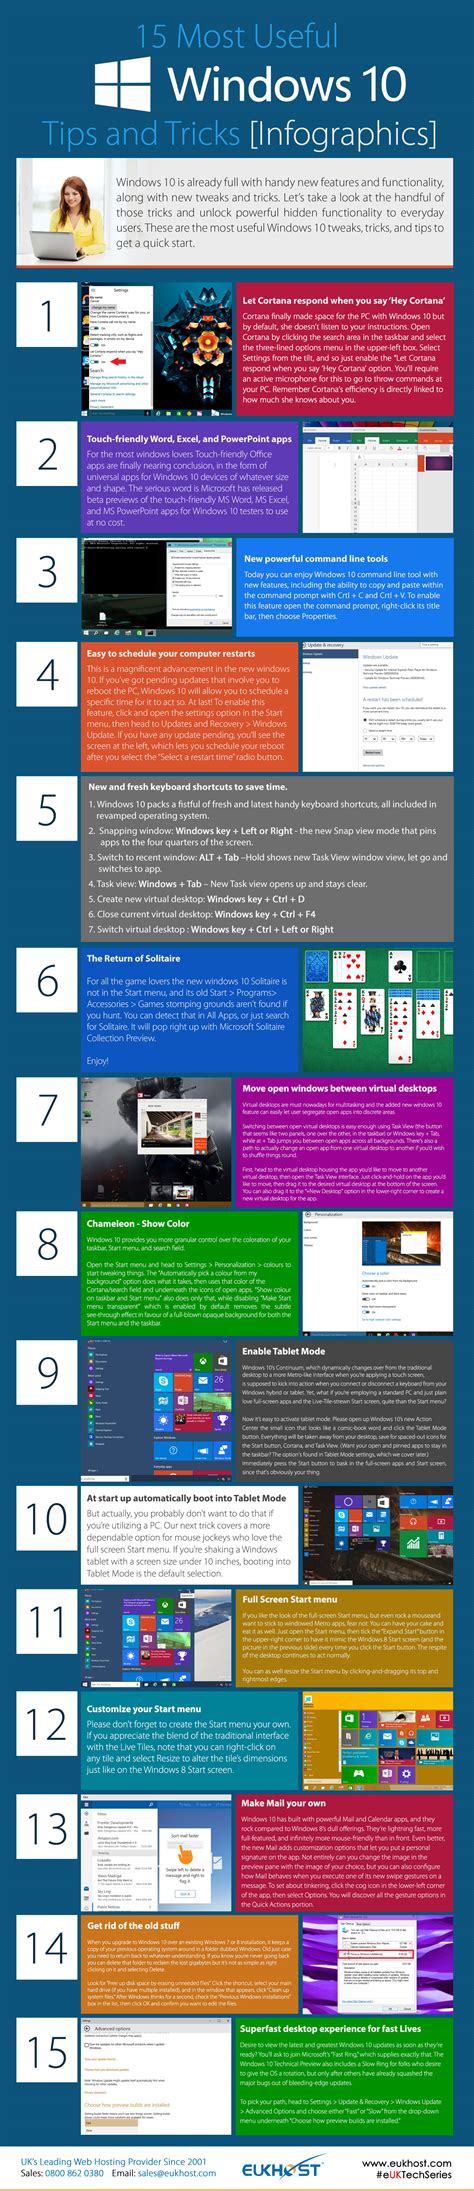 15 Most Useful Windows 10 Tips And Tricks Infographic